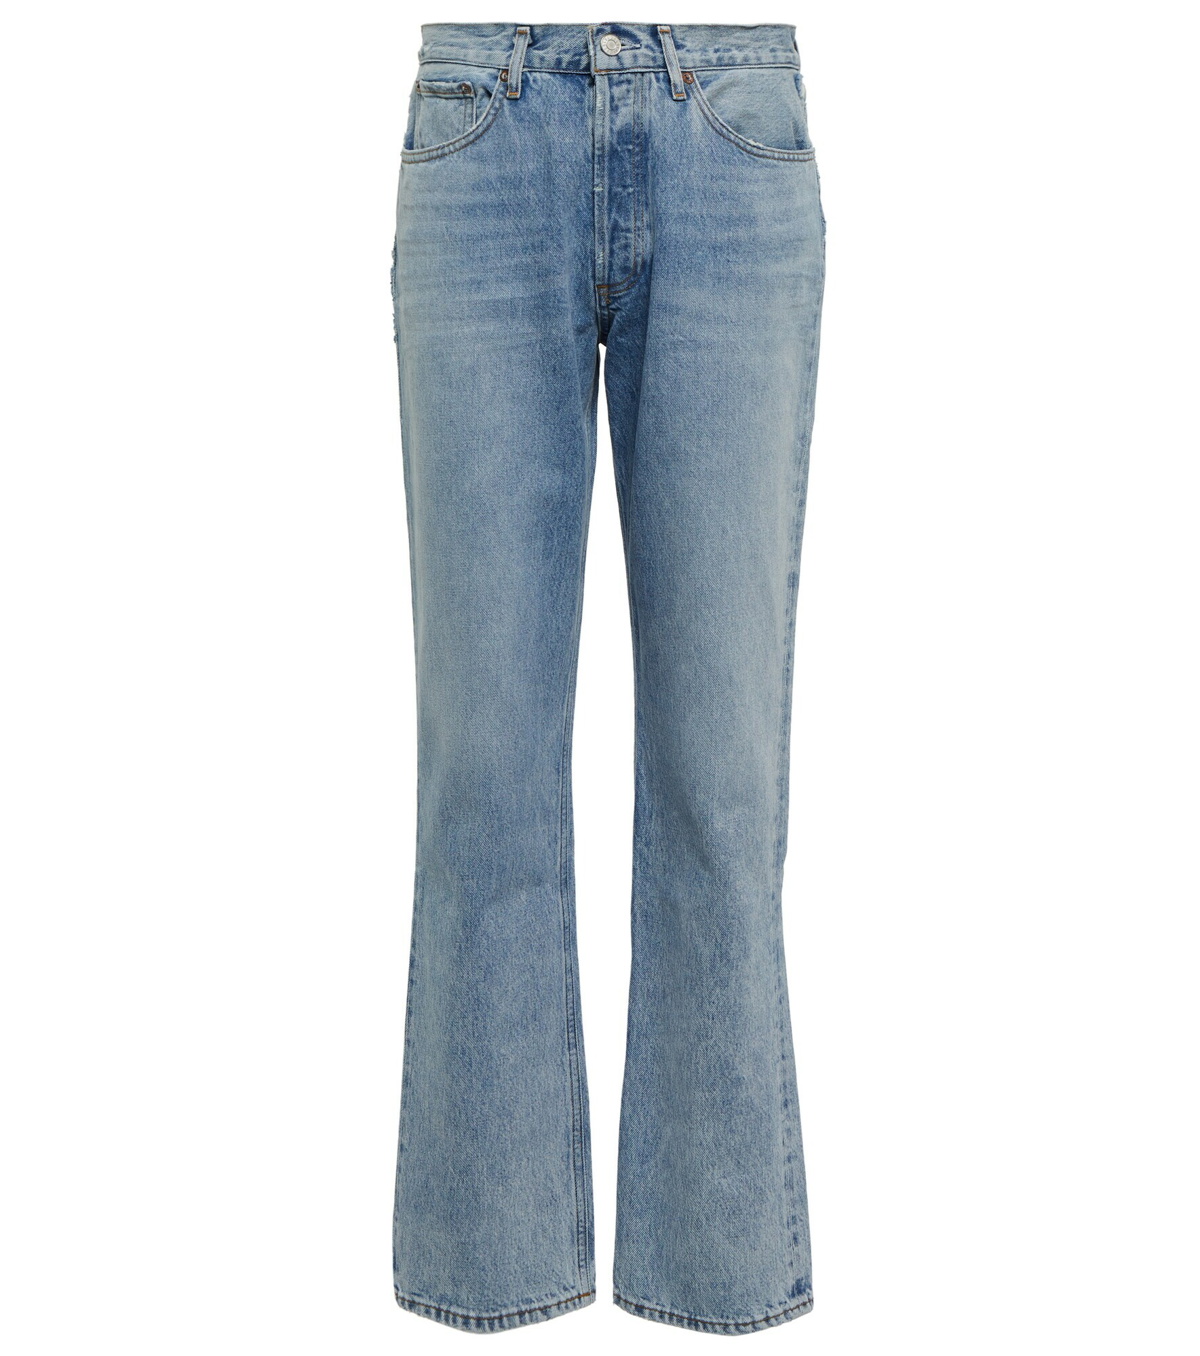 Agolde - Lana mid-rise straight jeans AGOLDE